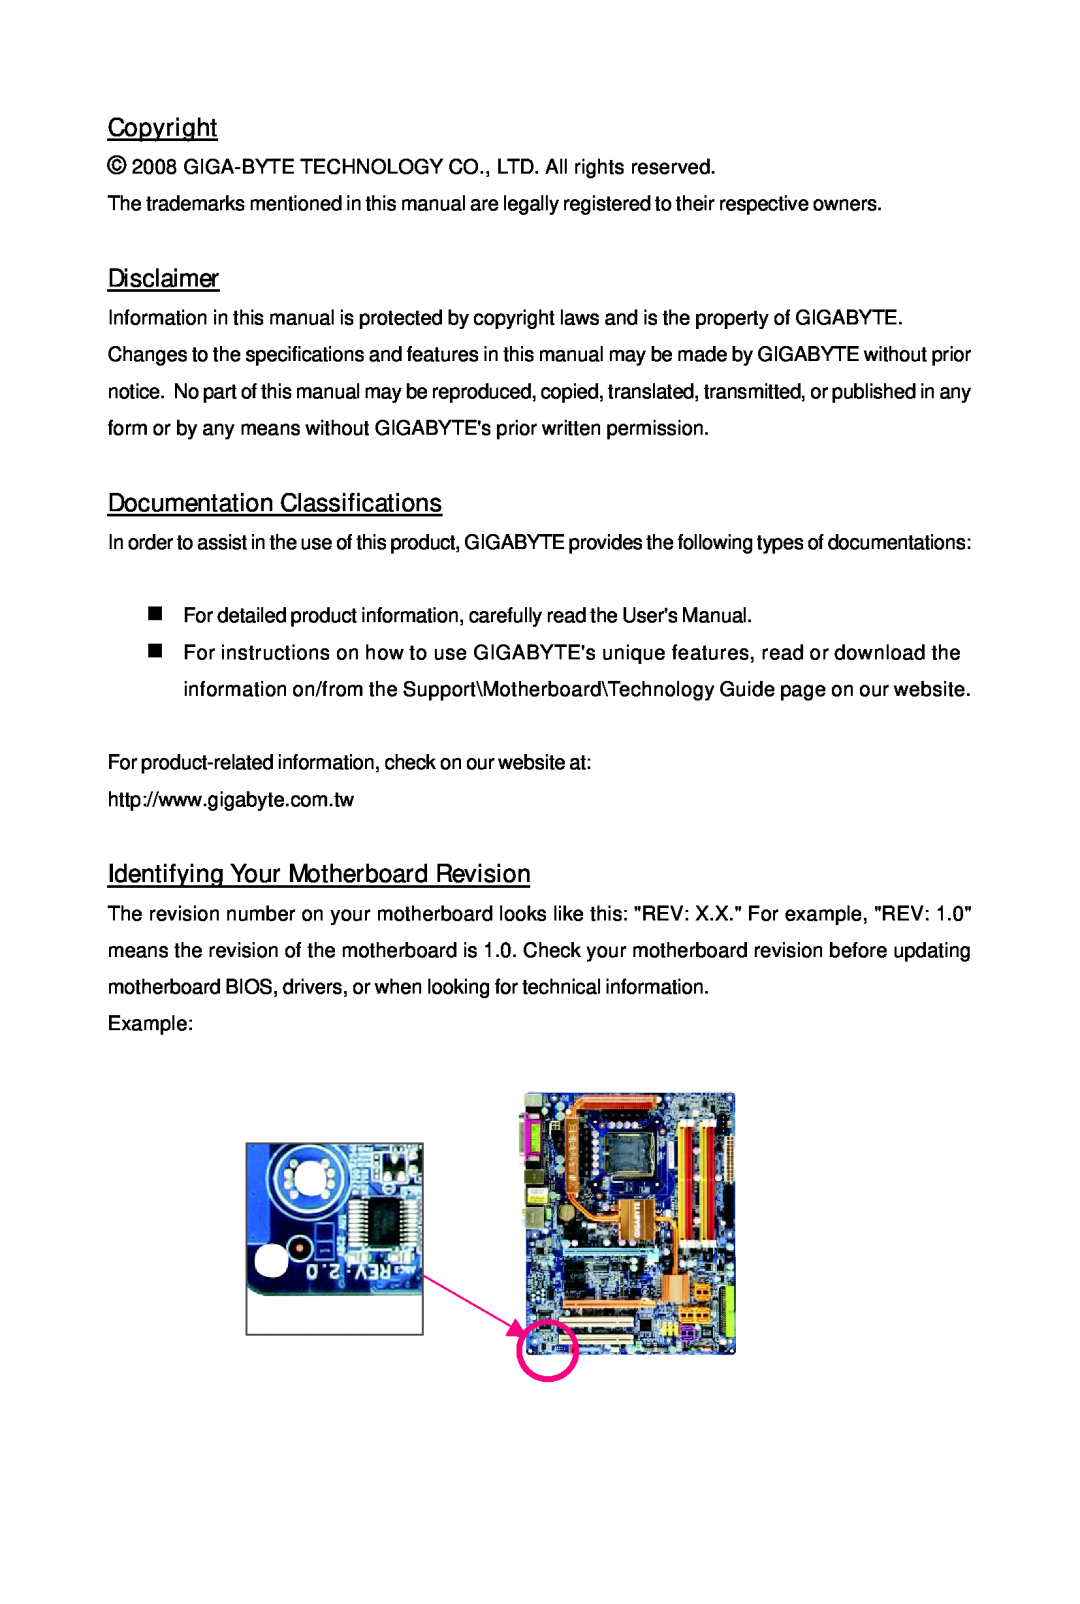 Intel GA-G31M-S2L, GA-G31M-S2C Copyright, Disclaimer, Documentation Classifications, Identifying Your Motherboard Revision 